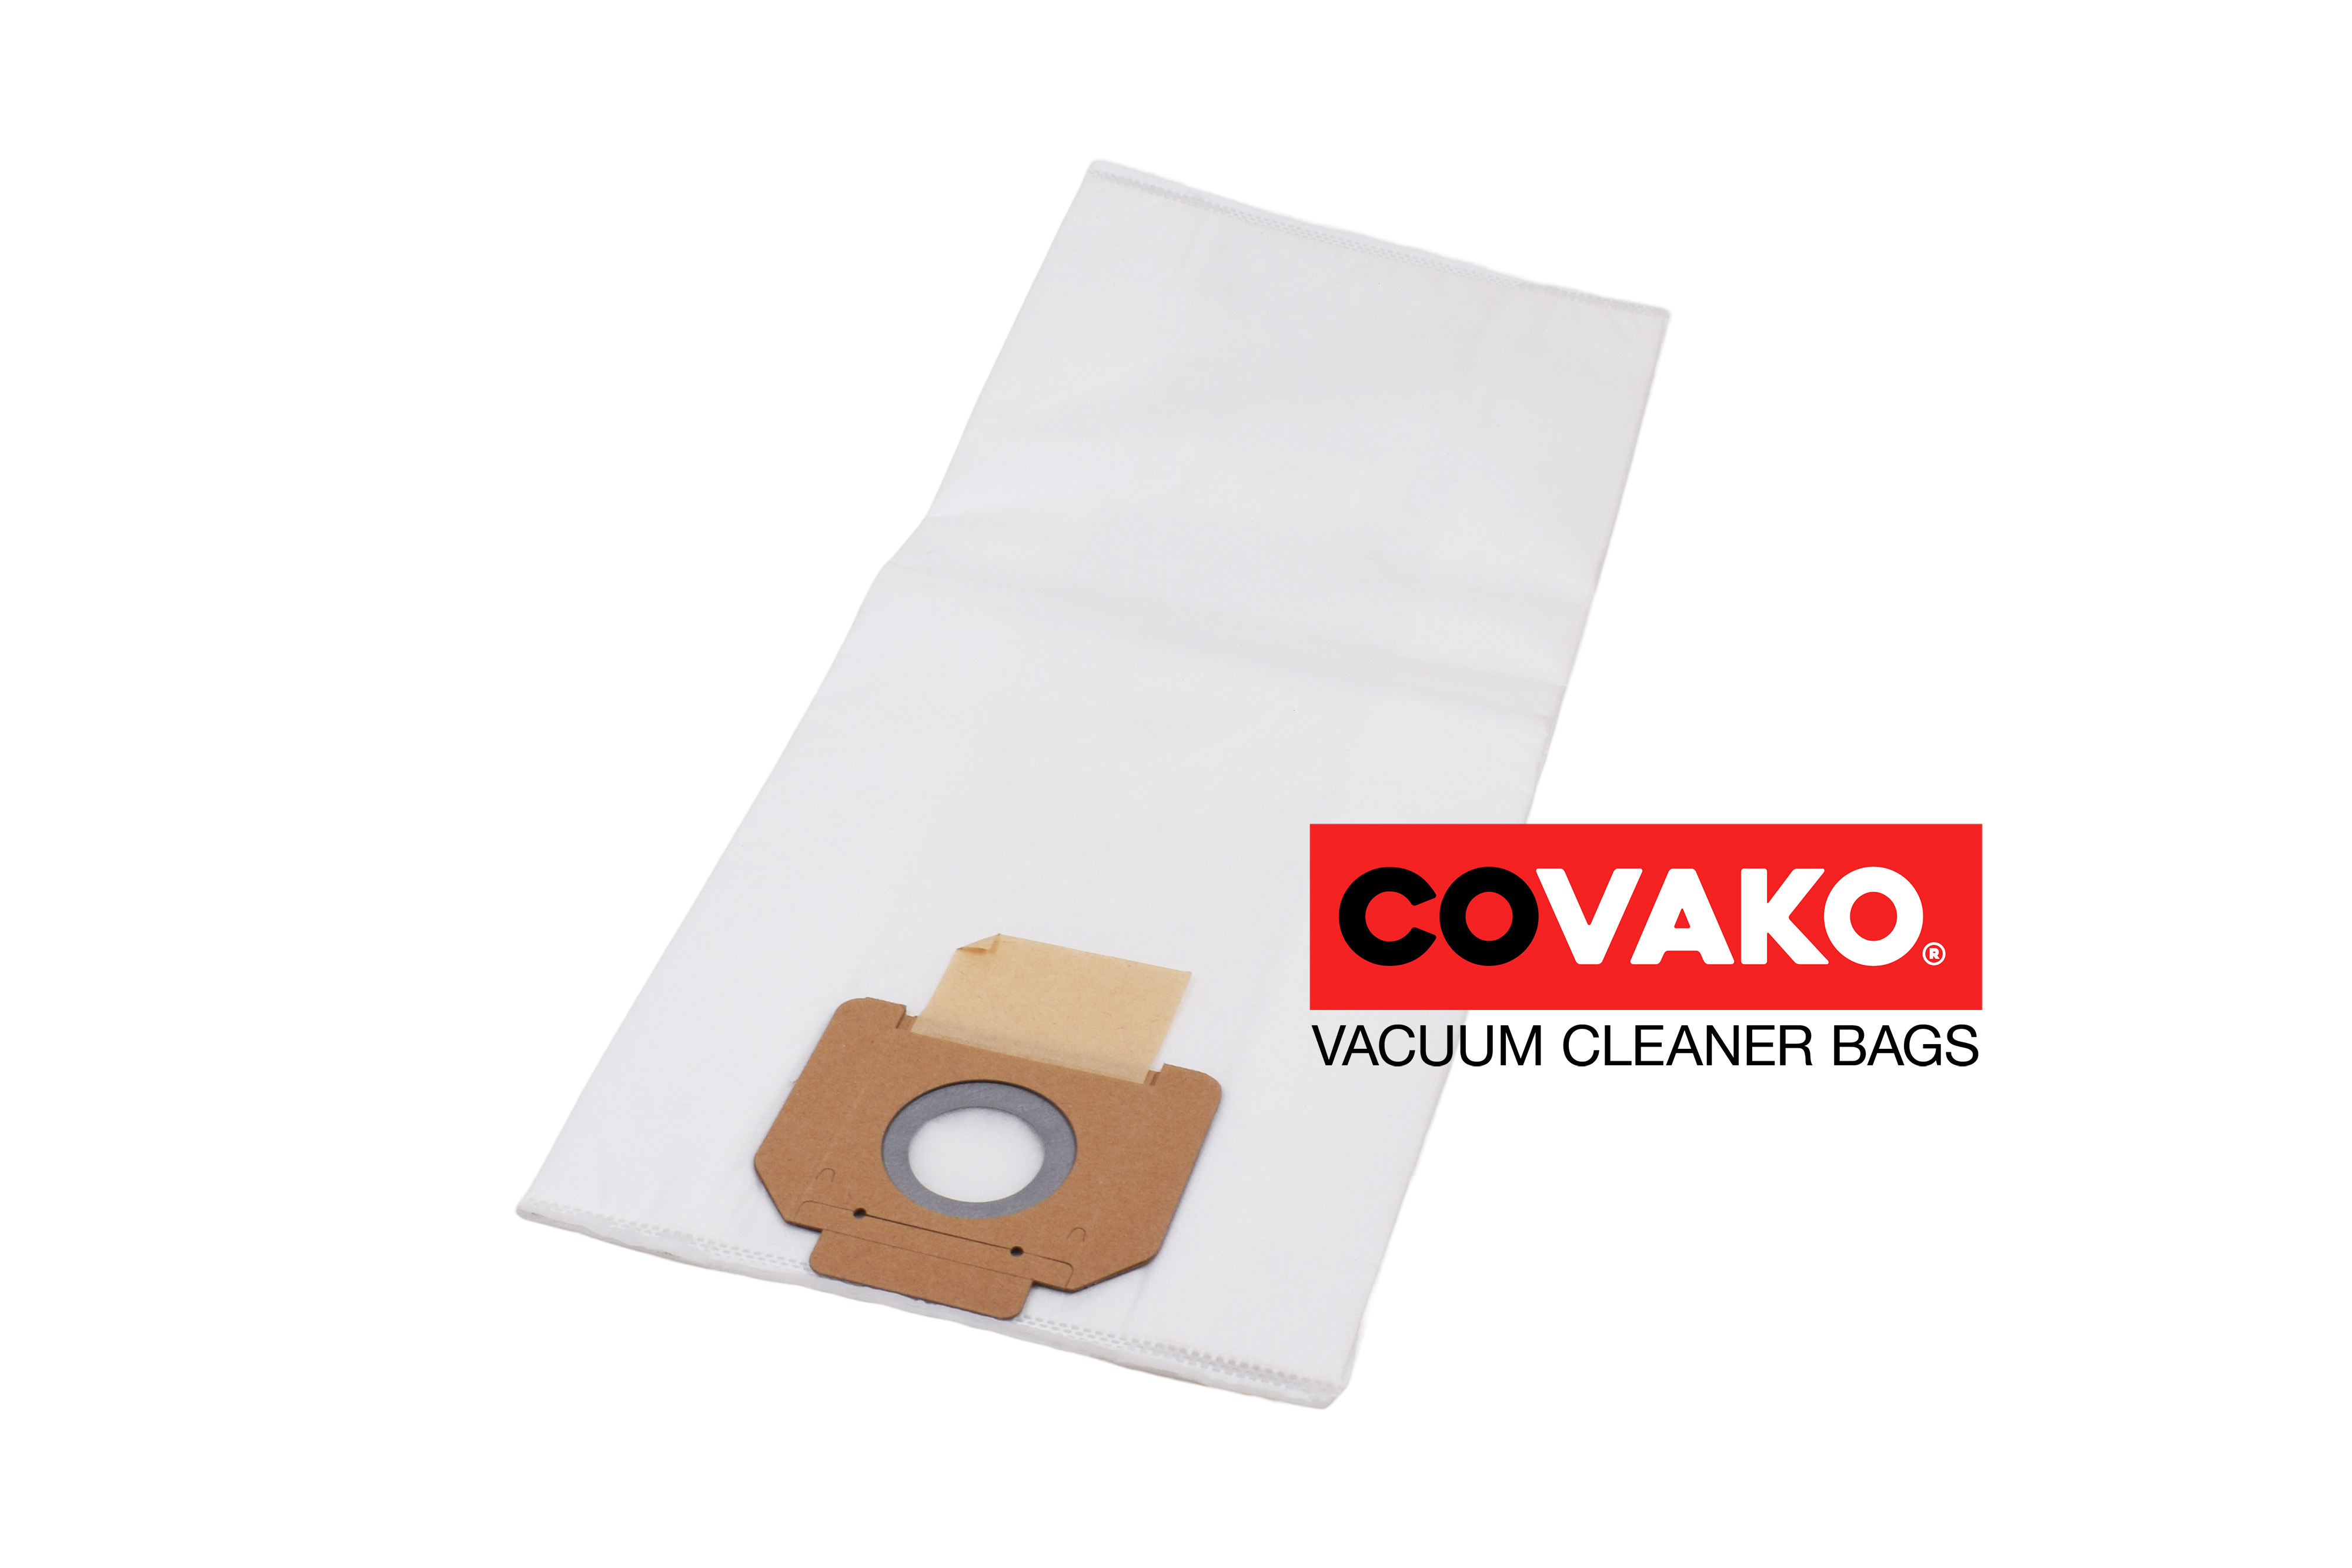 Cleancraft wetCat 262 ET / Synthesis - Cleancraft vacuum cleaner bags